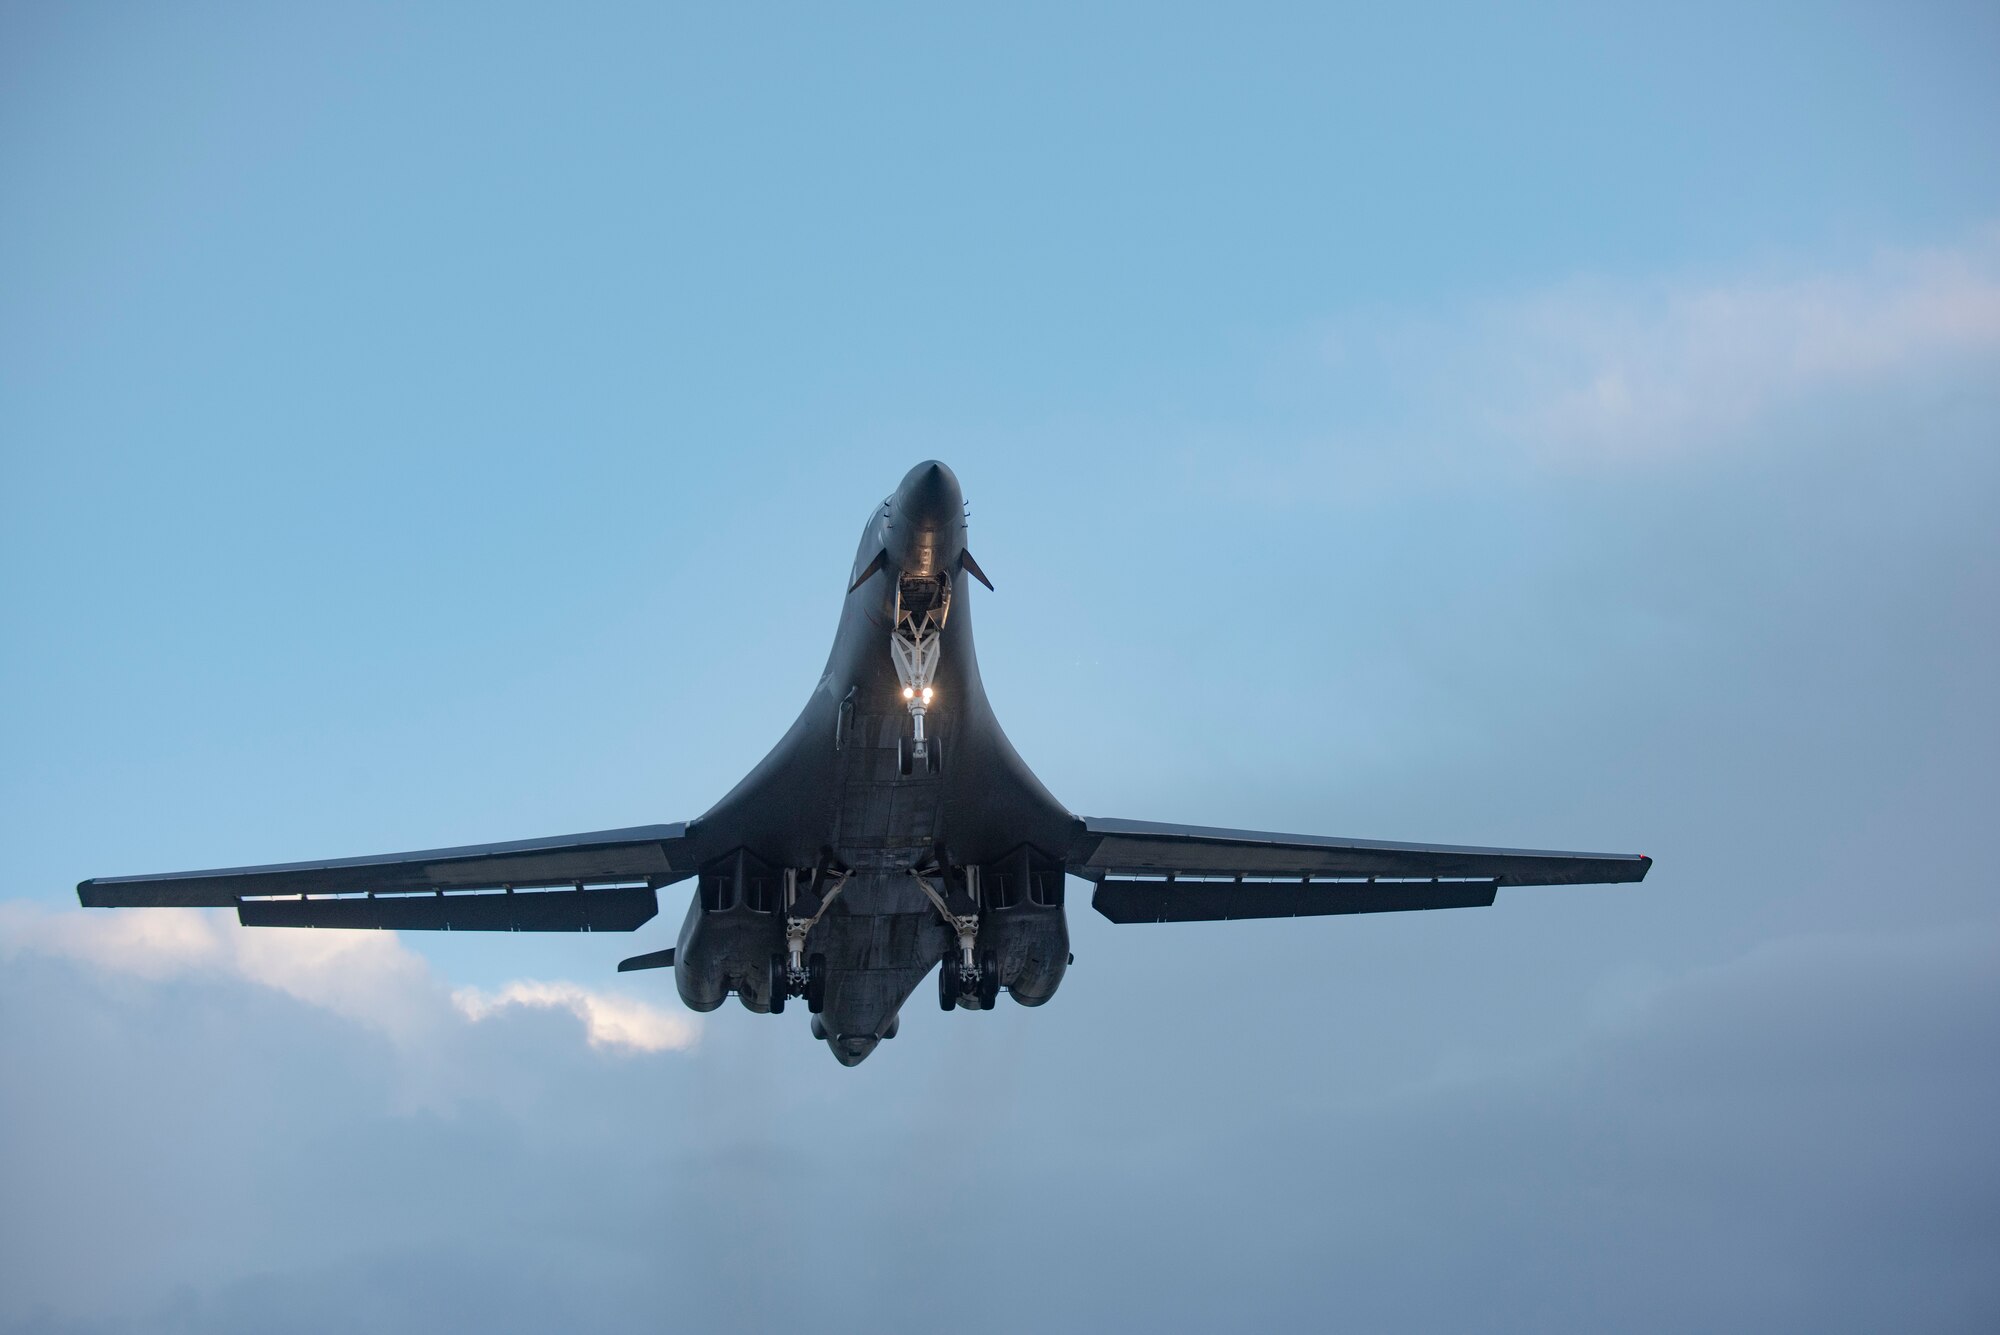 A B-1B Lancer assigned to the 9th Expeditionary Bomb Squadron prepares to land at Ørland Air Force Station, Norway, March 3, 2021. The 9th EBS will participate in a variety of integration and training missions with NATO ally and partner forces over the course of the Bomber Task Force Europe deployment. (U.S. Air Force photo by Airman 1st Class Colin Hollowell)